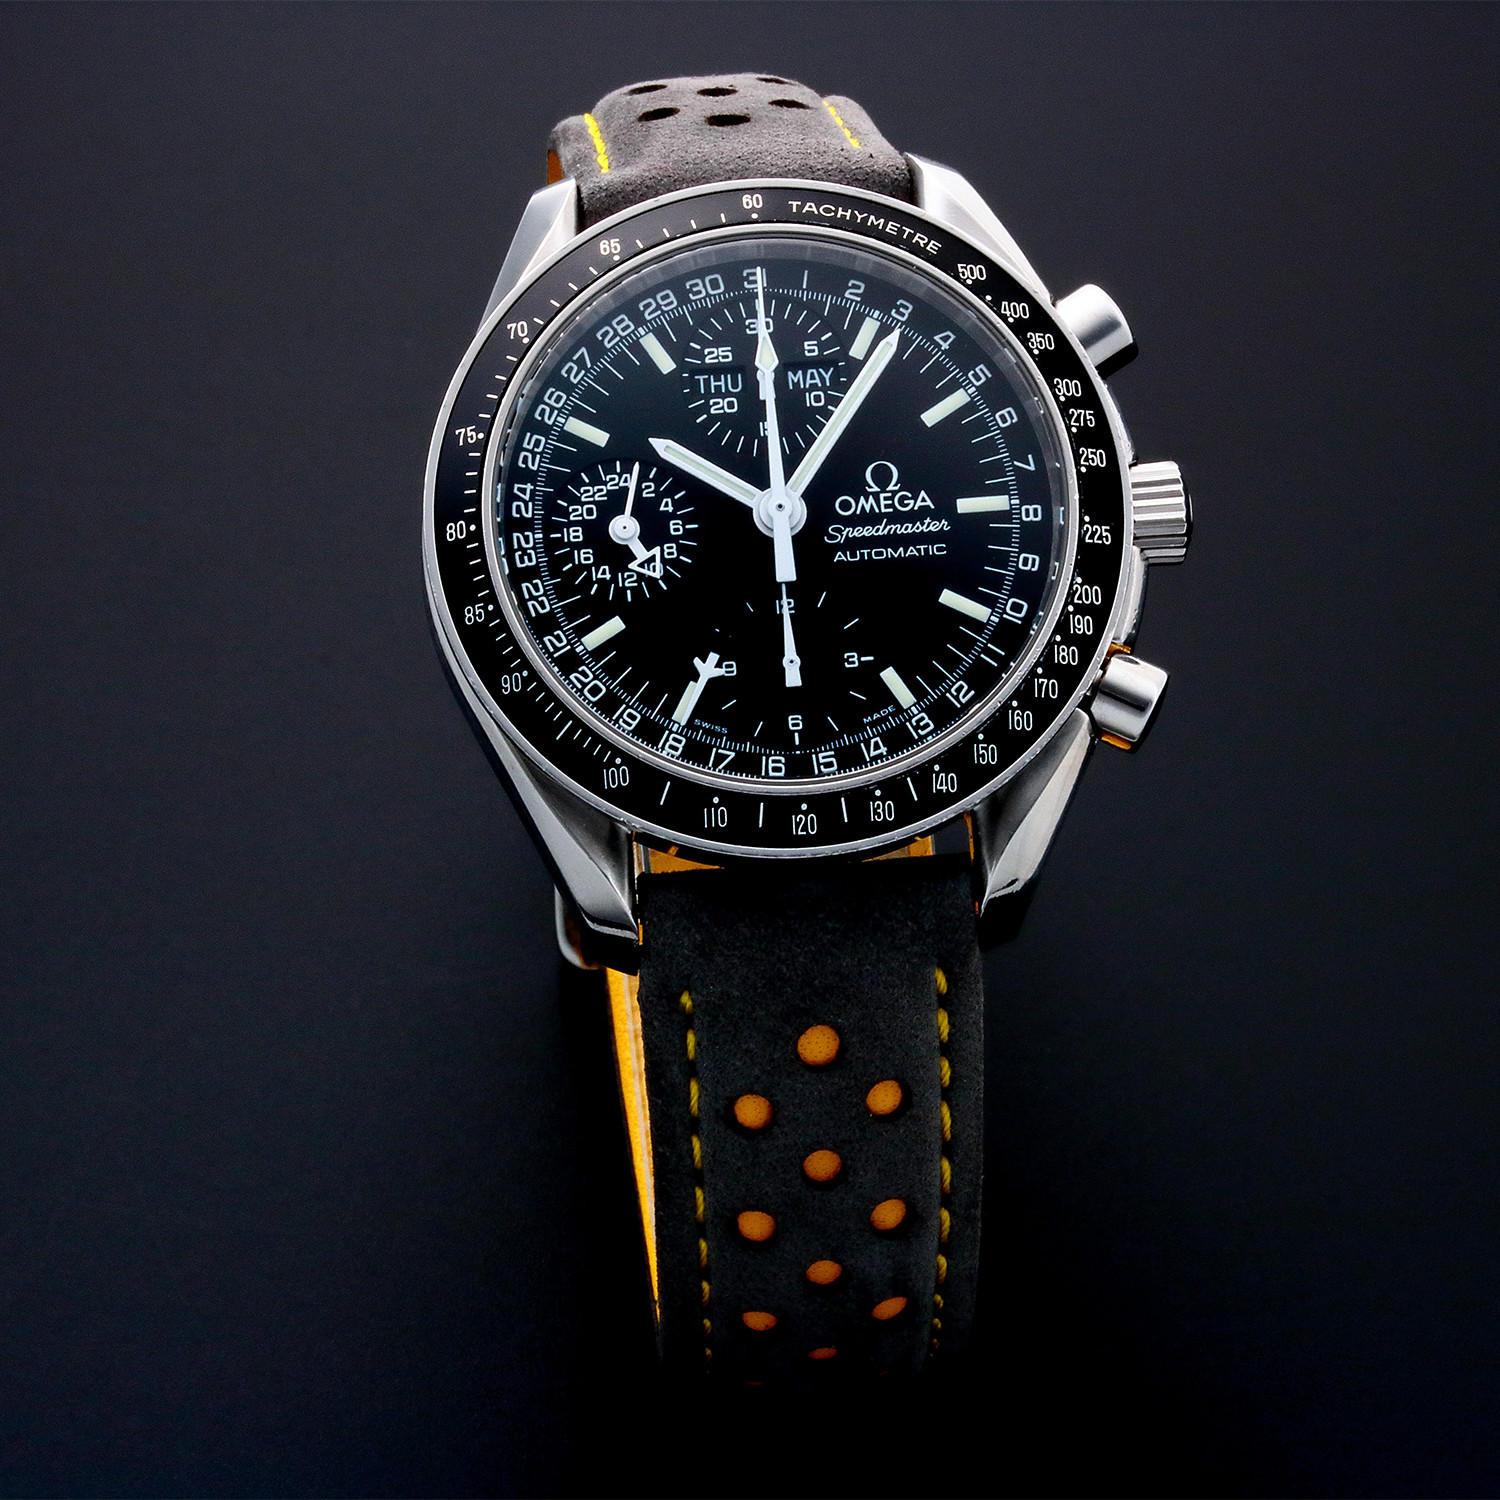 omega-speedmaster-sport-day-date-chronograph-automatic-35205-pre